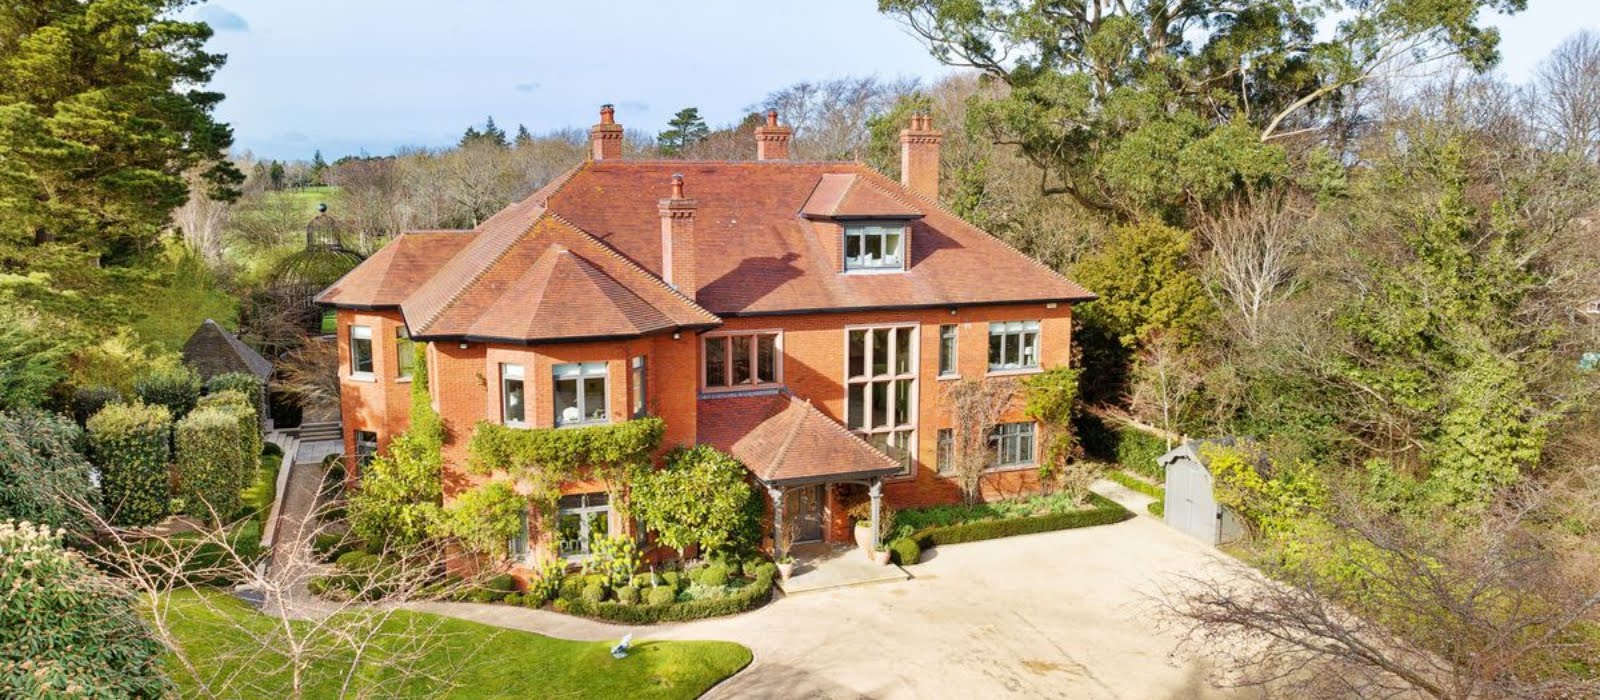 This sprawling Foxrock home is on the market for €6.75 million